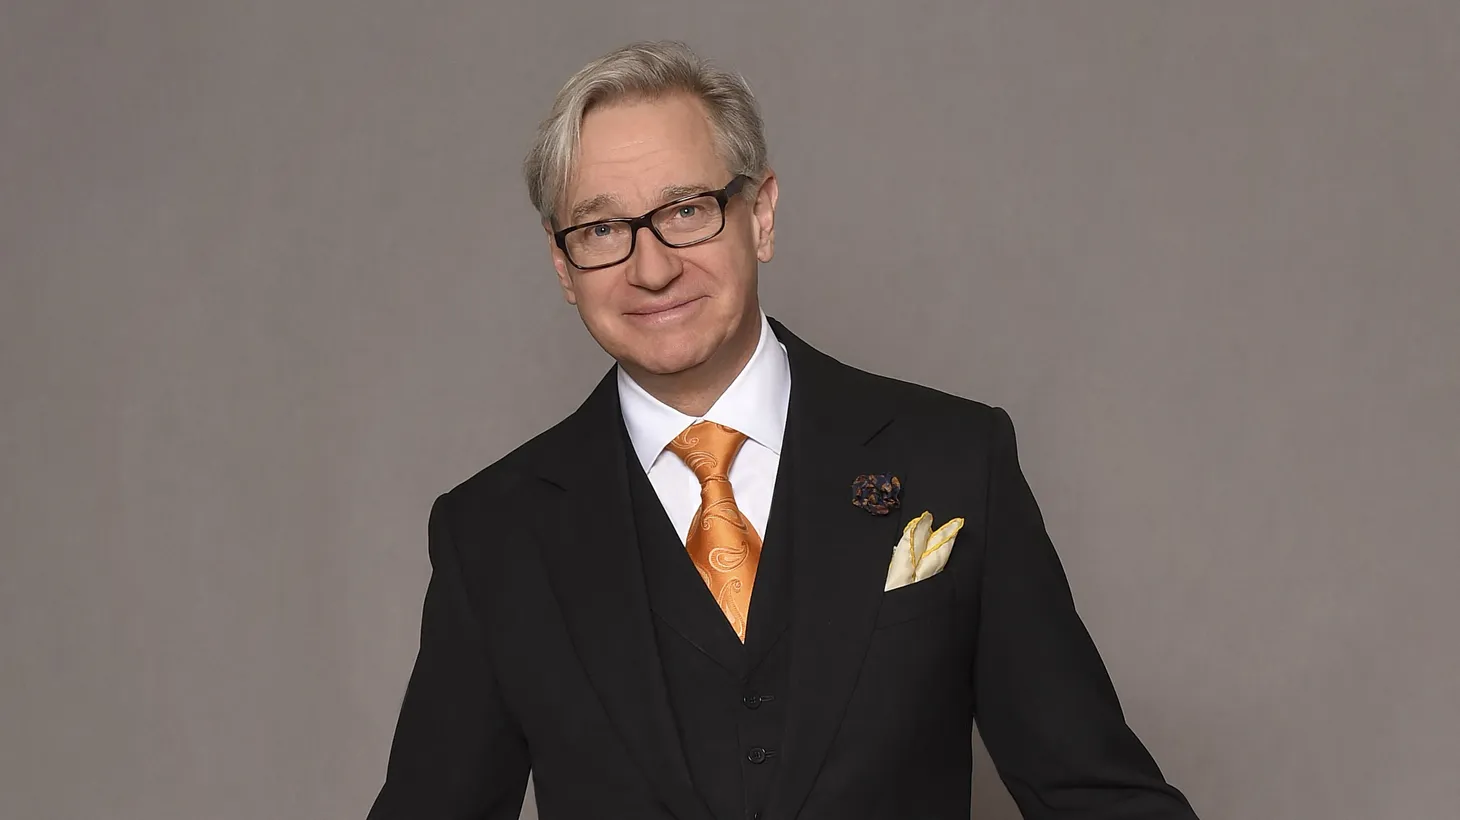 “If I had to pick the one thing that sort of changed my life the most, it was a paperweight,” says Paul Feig.